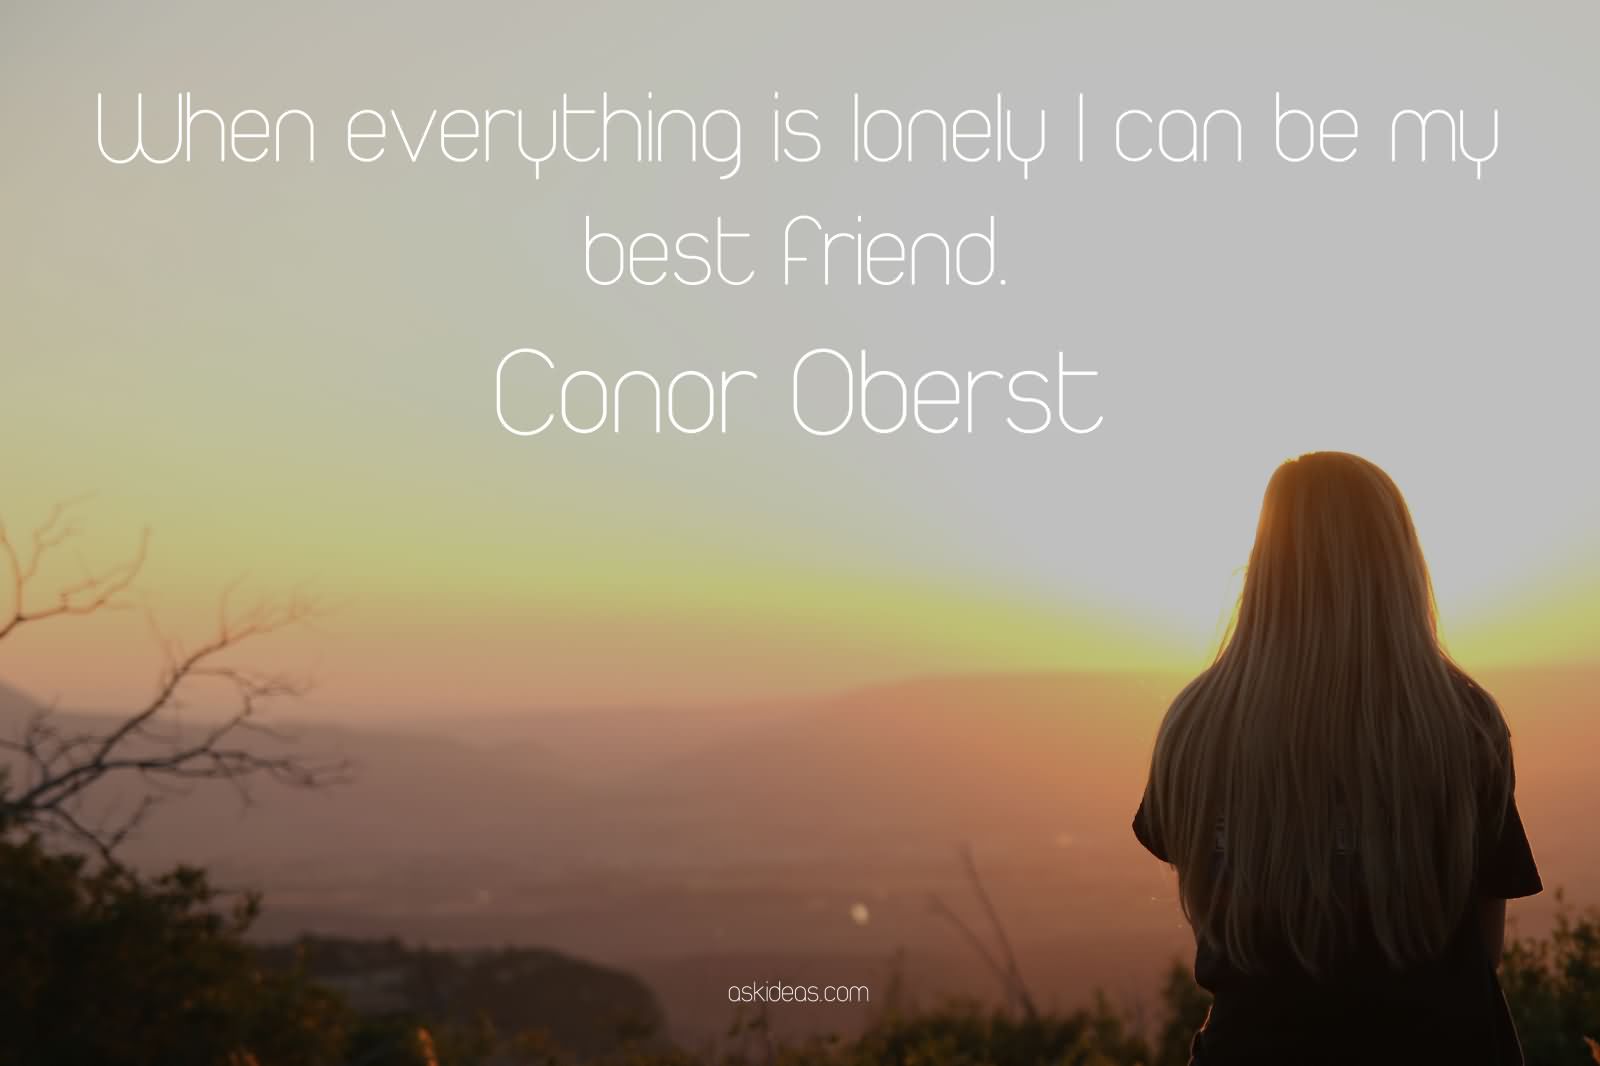 When everything is lonely I can be my best friend